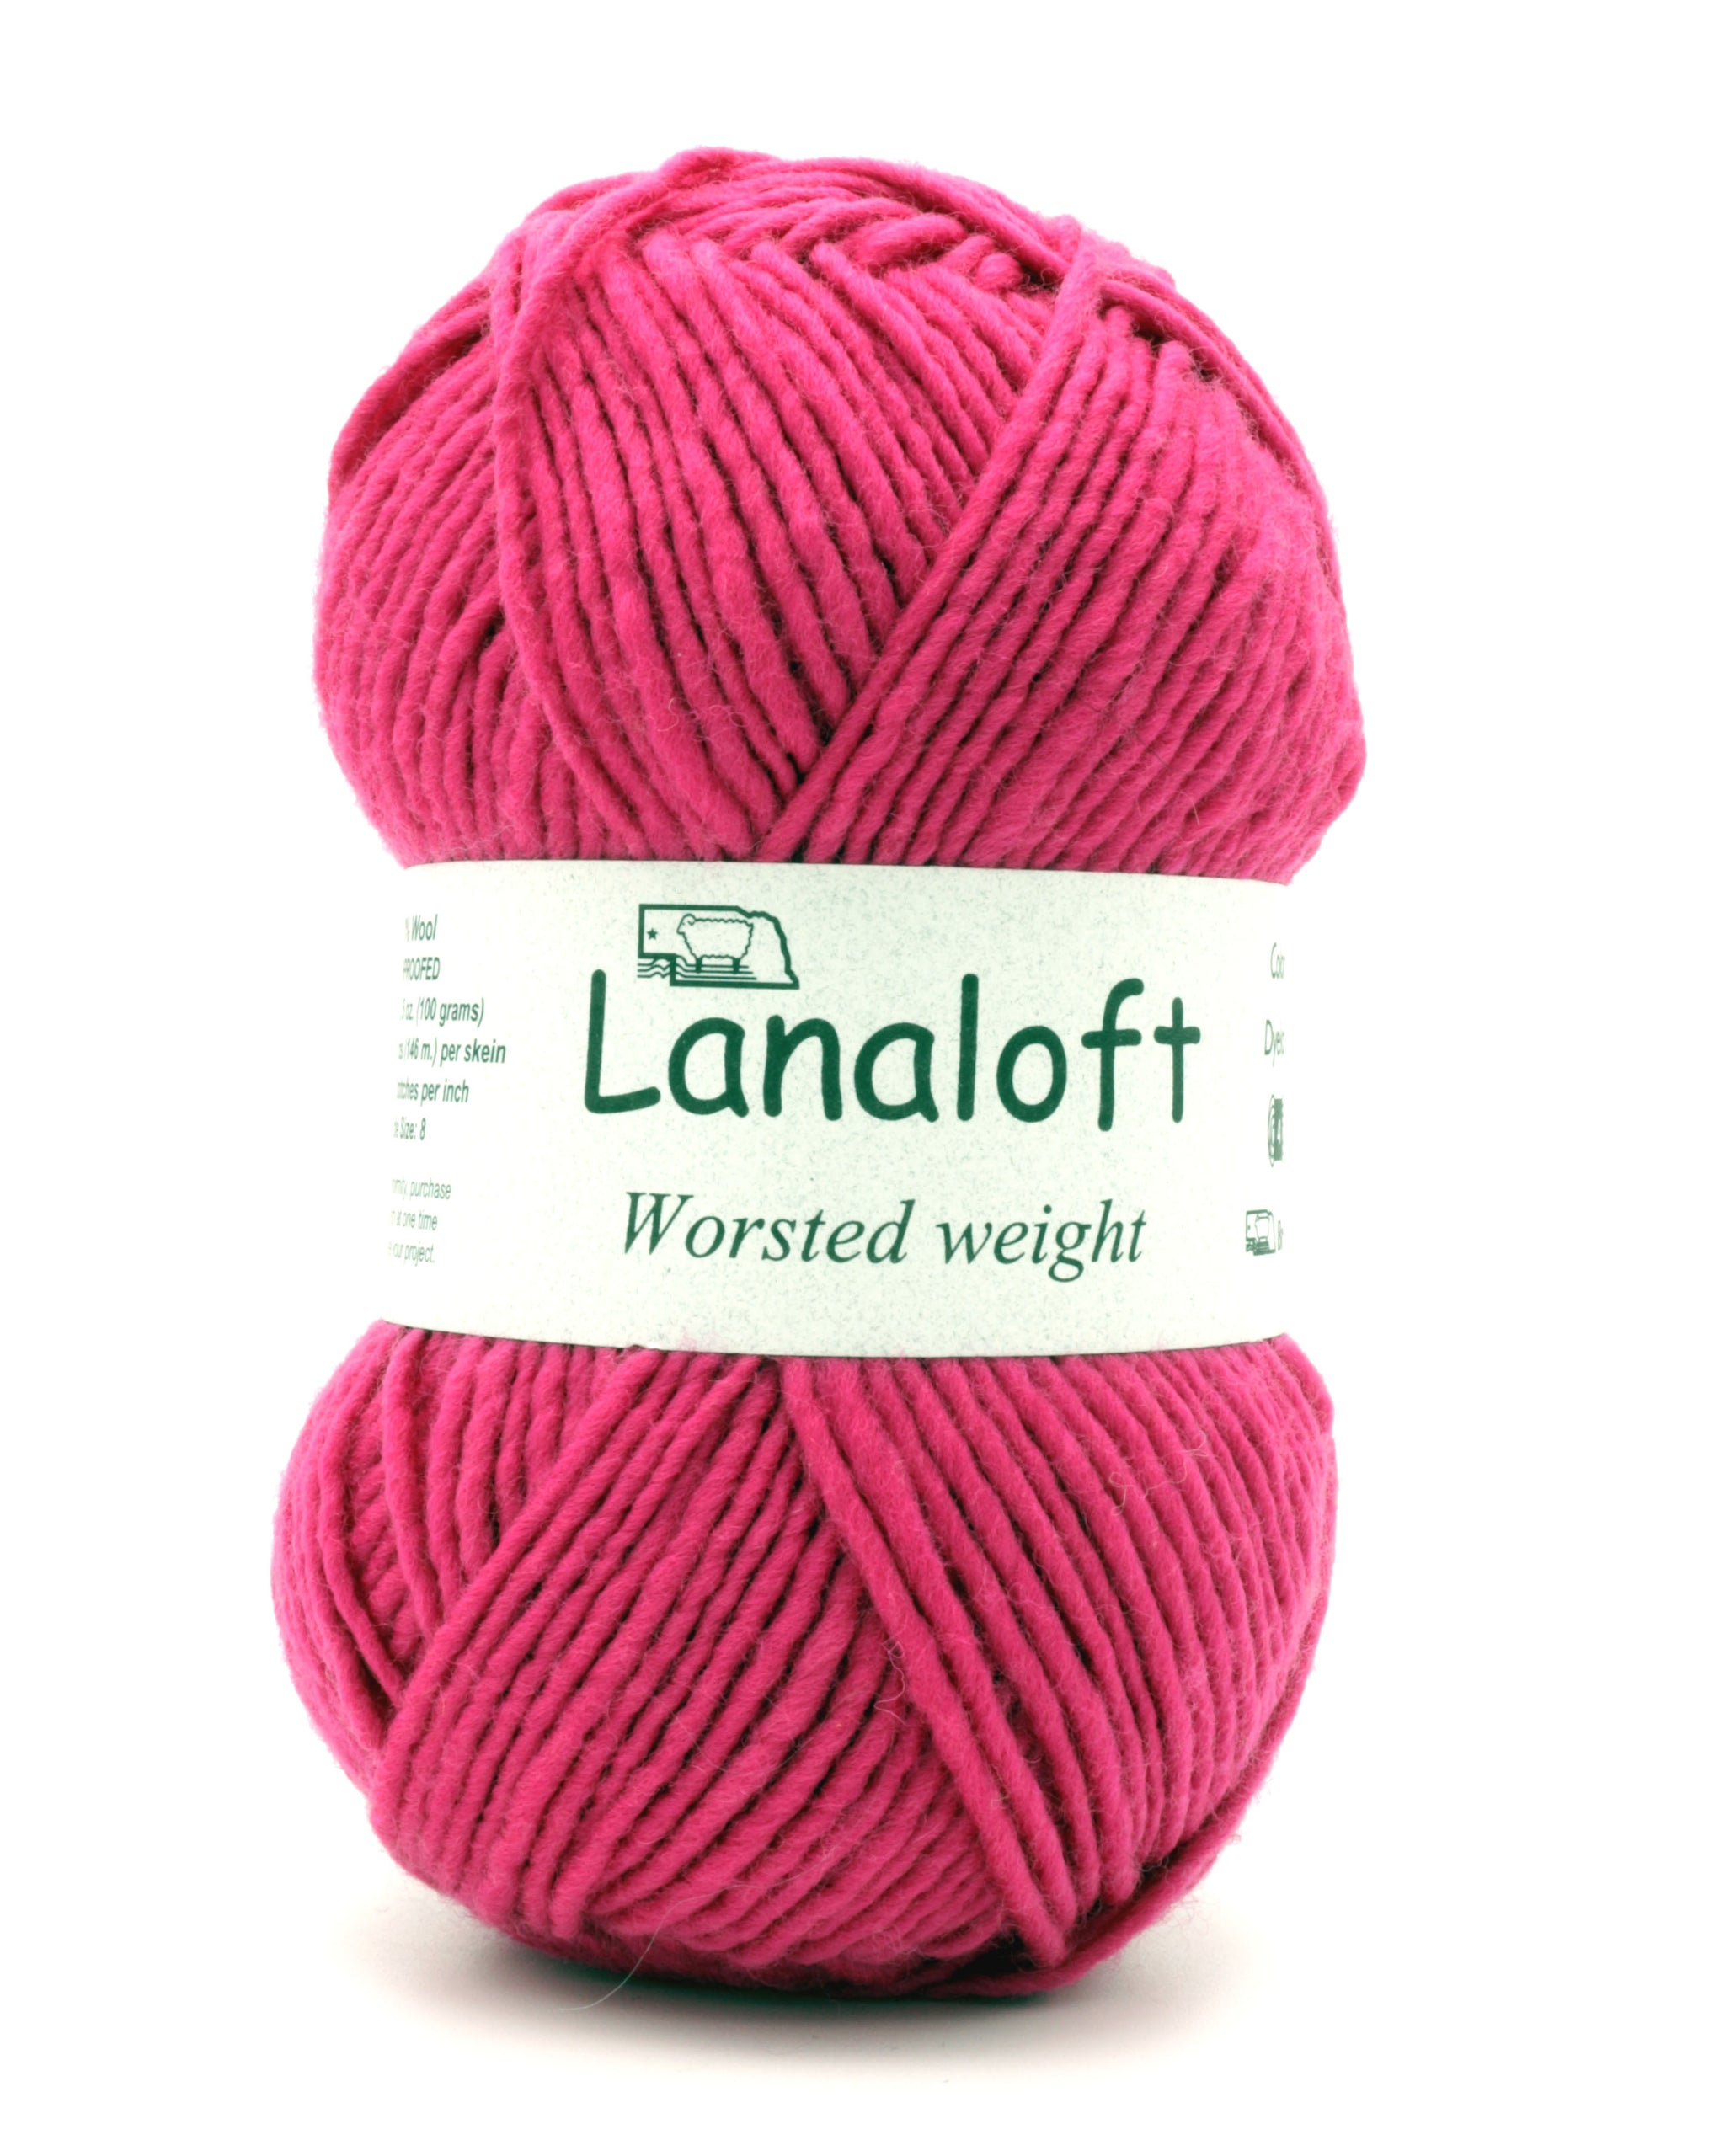 Swish Worsted Weight Yarn Review - The Loopy Lamb